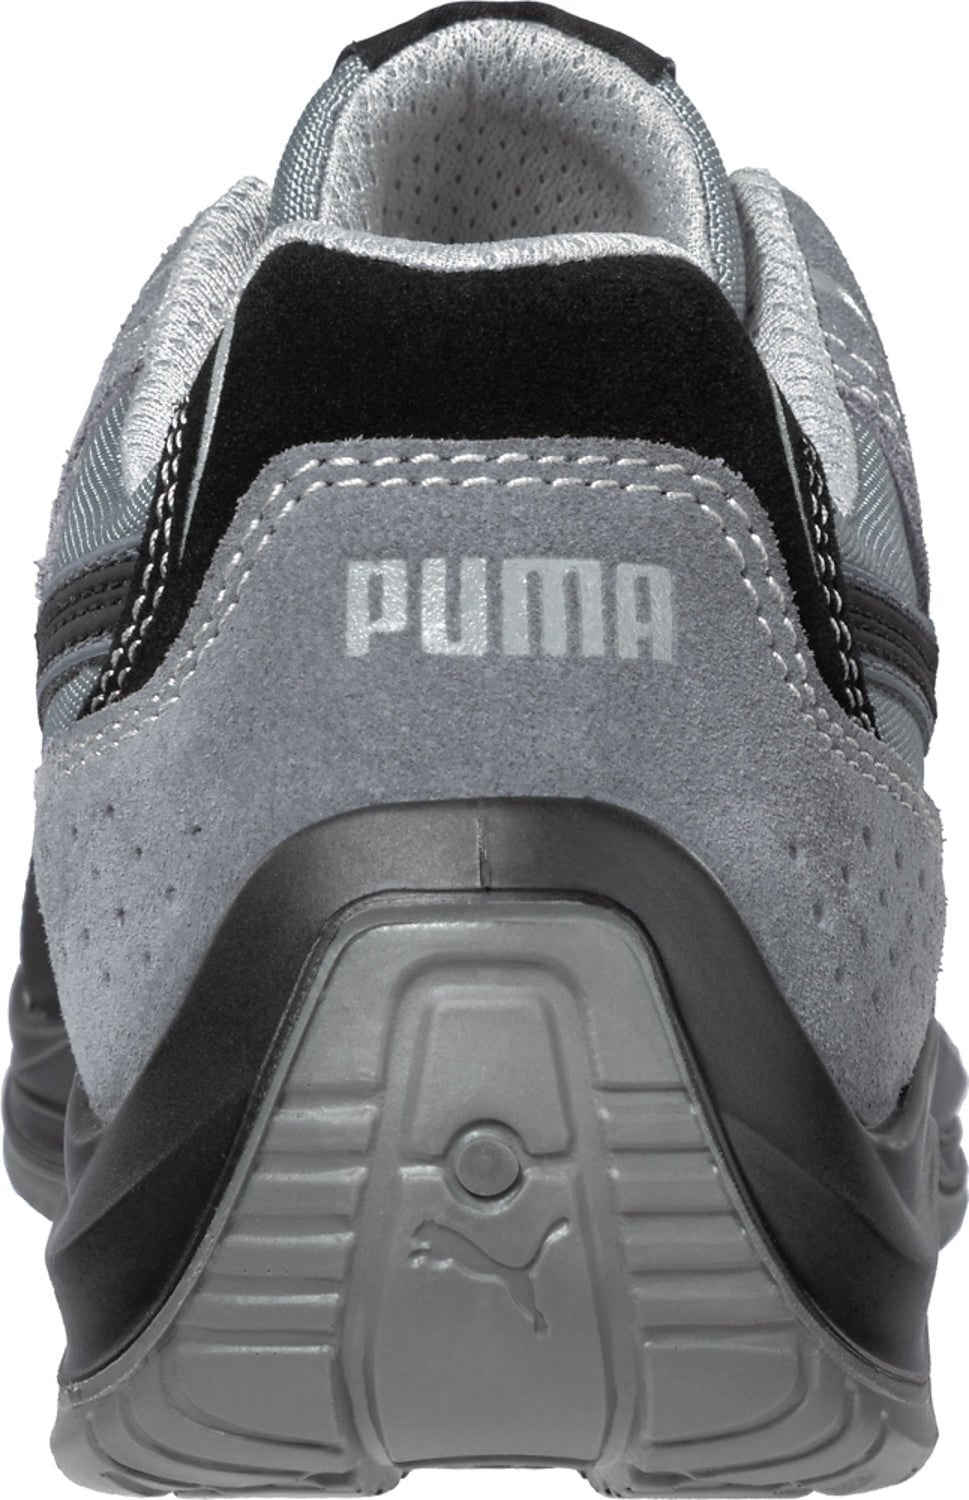 Safety Western – Suede Leather Work Oxford Touring S The Company Puma CT Moto Low Mens Black